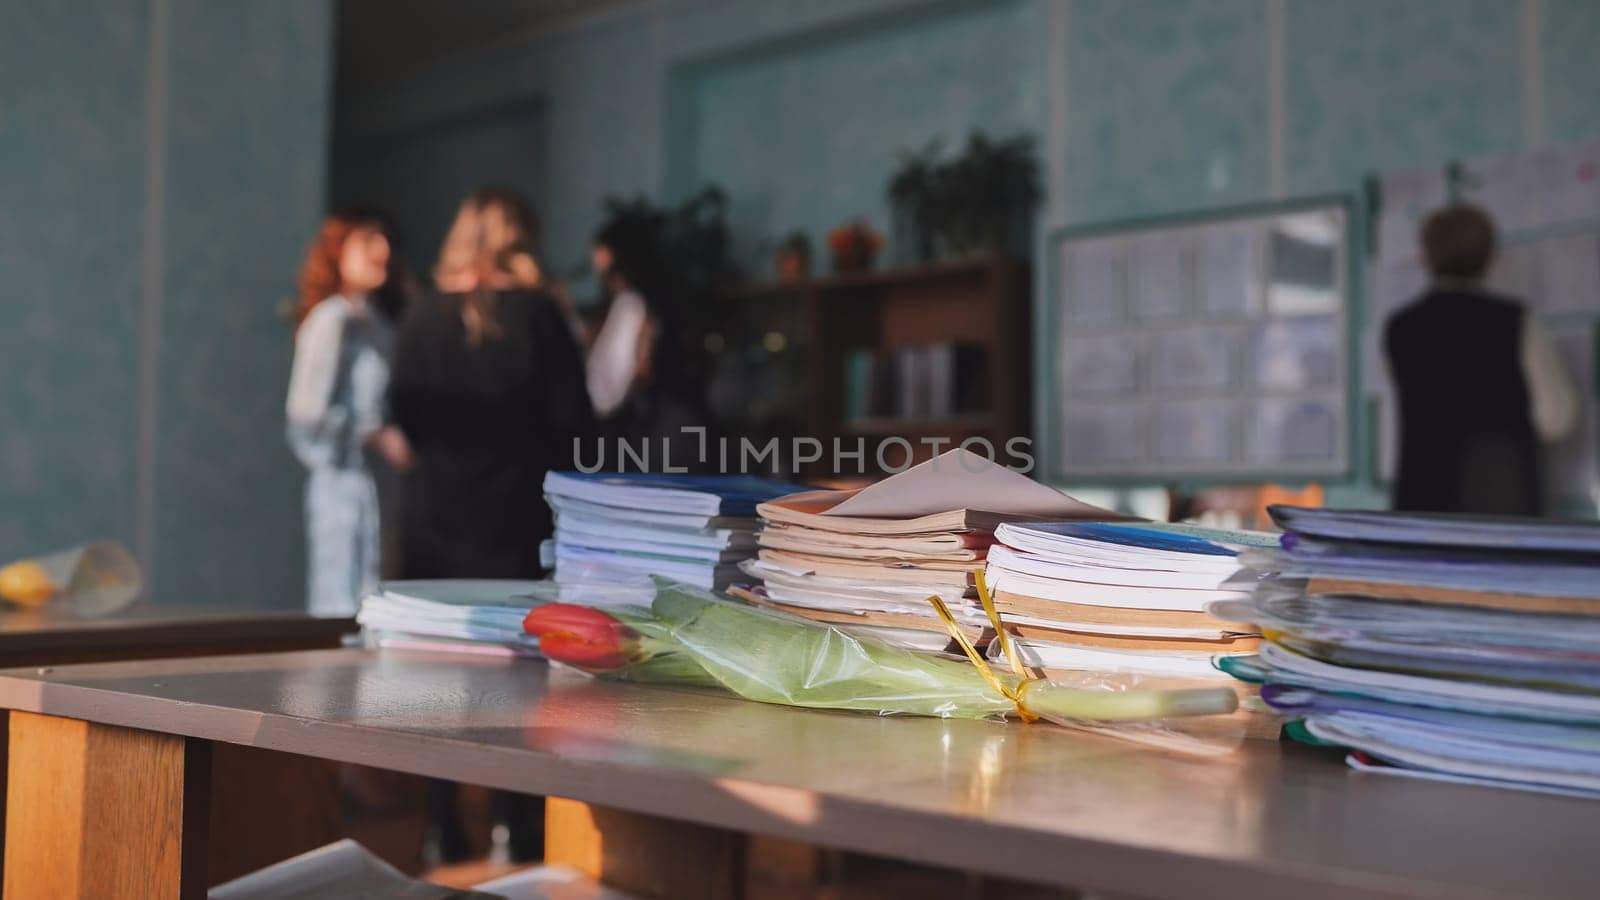 Stacks of books and notebooks in a school classroom during recess. by DovidPro